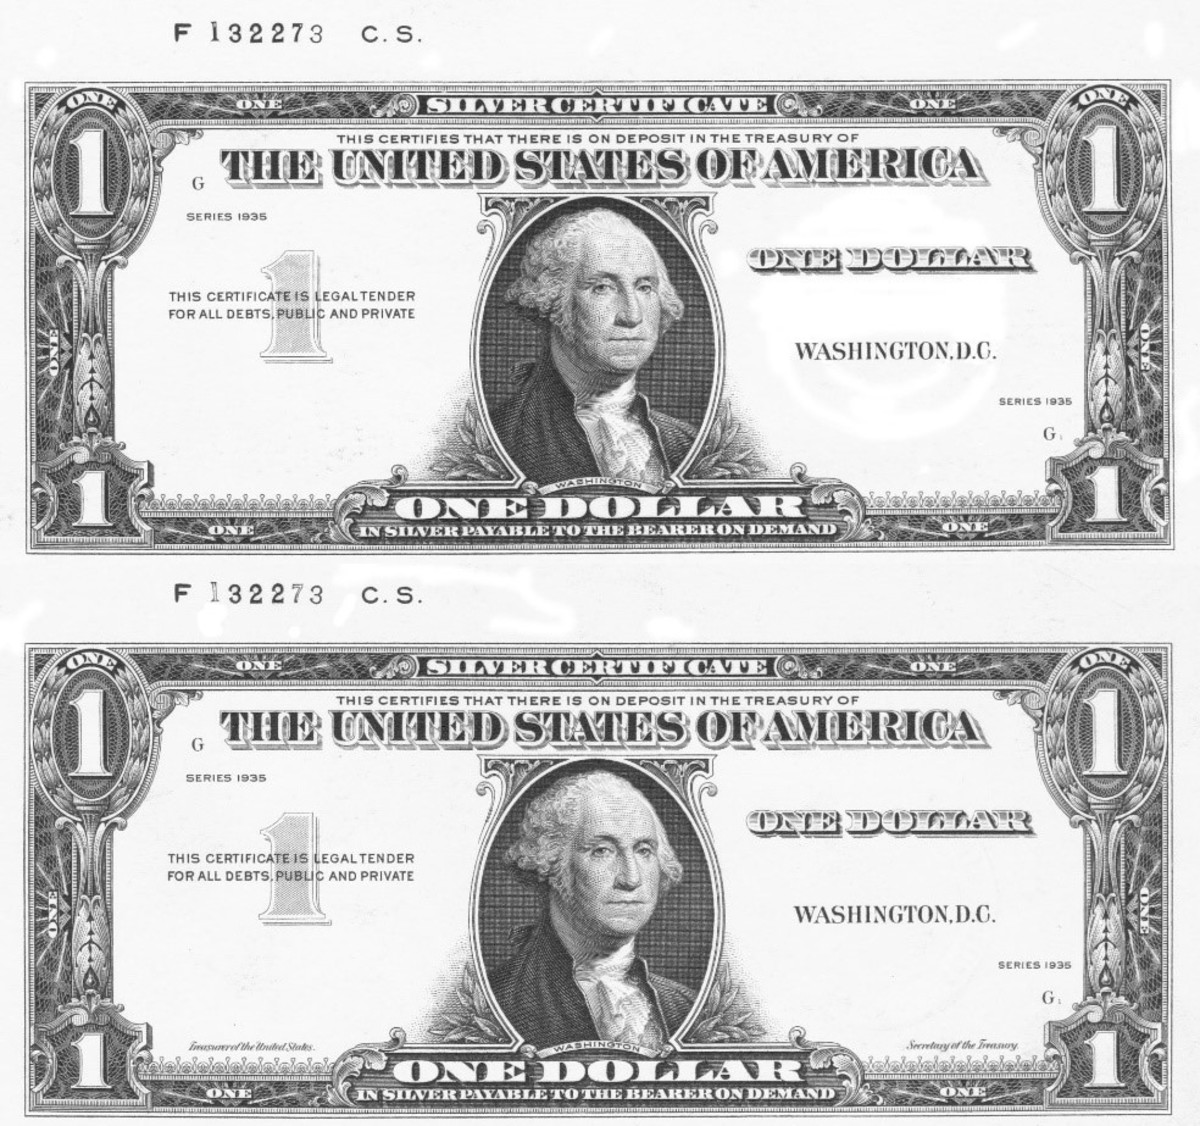 The first $1 Series of 1935 silver certificate production plates were made in August 1935. Both of these subjects are from the G position of plate 1. Notice that the titles of the Treasury officials were initially omitted (top) in anticipation of them being overprinted along with the signatures. The titles were added (bottom) after it was recognized that there was no benefit to overprinting them because the titles never would change. This particular plate was recertified with the added titles on October 18, 1935.